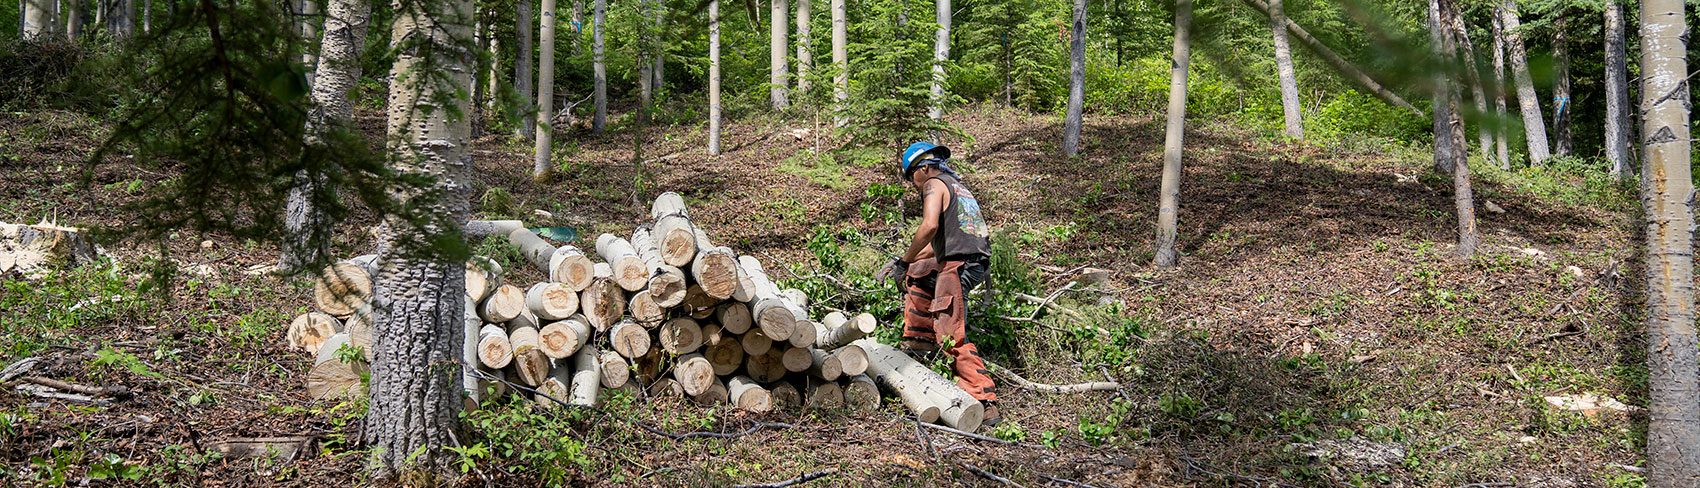 Worker in hard hat piles up logs in the forest.